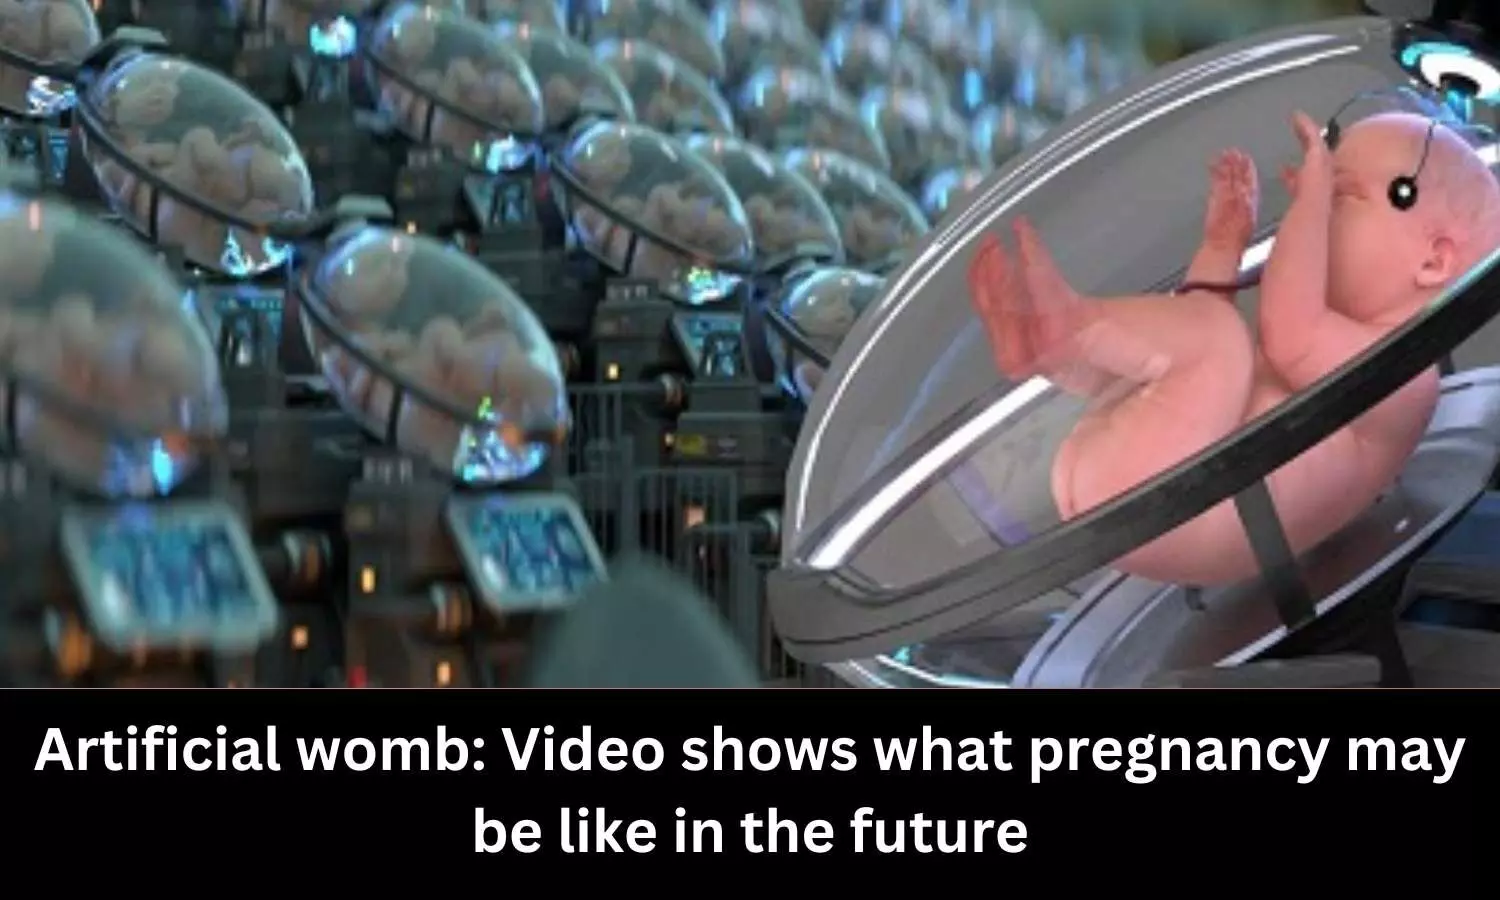 Artificial womb: Video shows what pregnancy may be like in the future